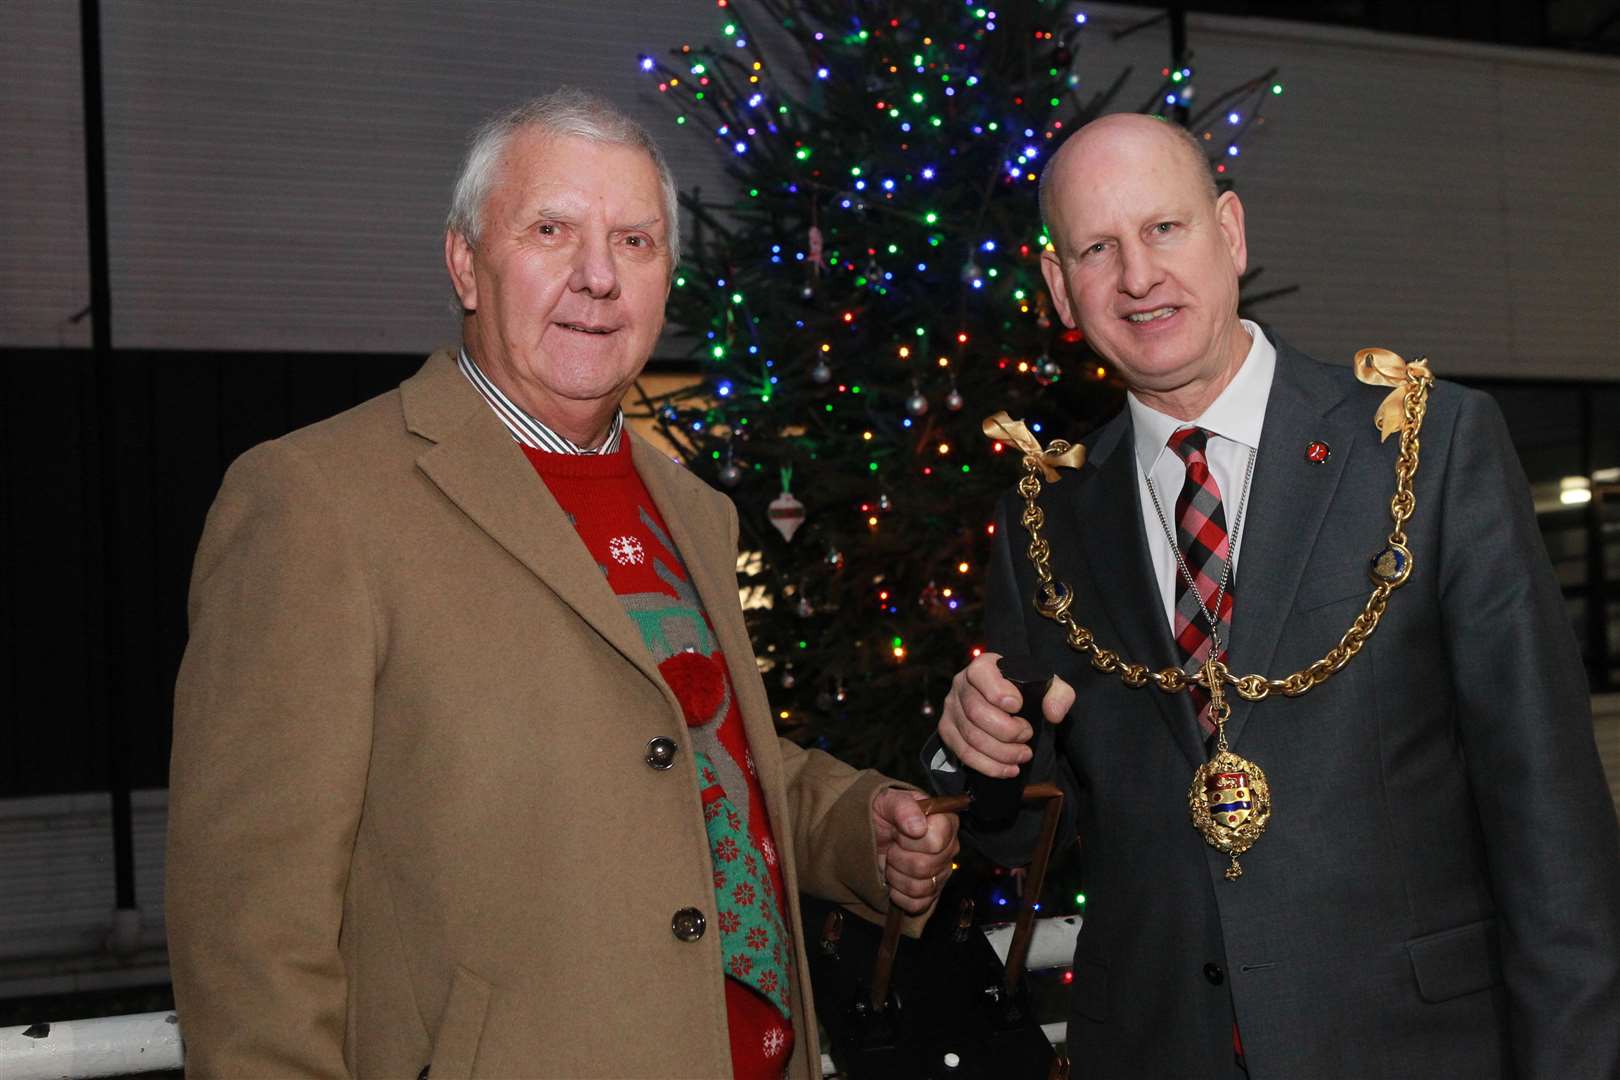 Gareth Owen, chairman of the League of Friends, and the Mayor of Maidstone Cllr Dave Naghi turn on the Christmas lights at Maidstone Hospital. Picture: John Westhrop